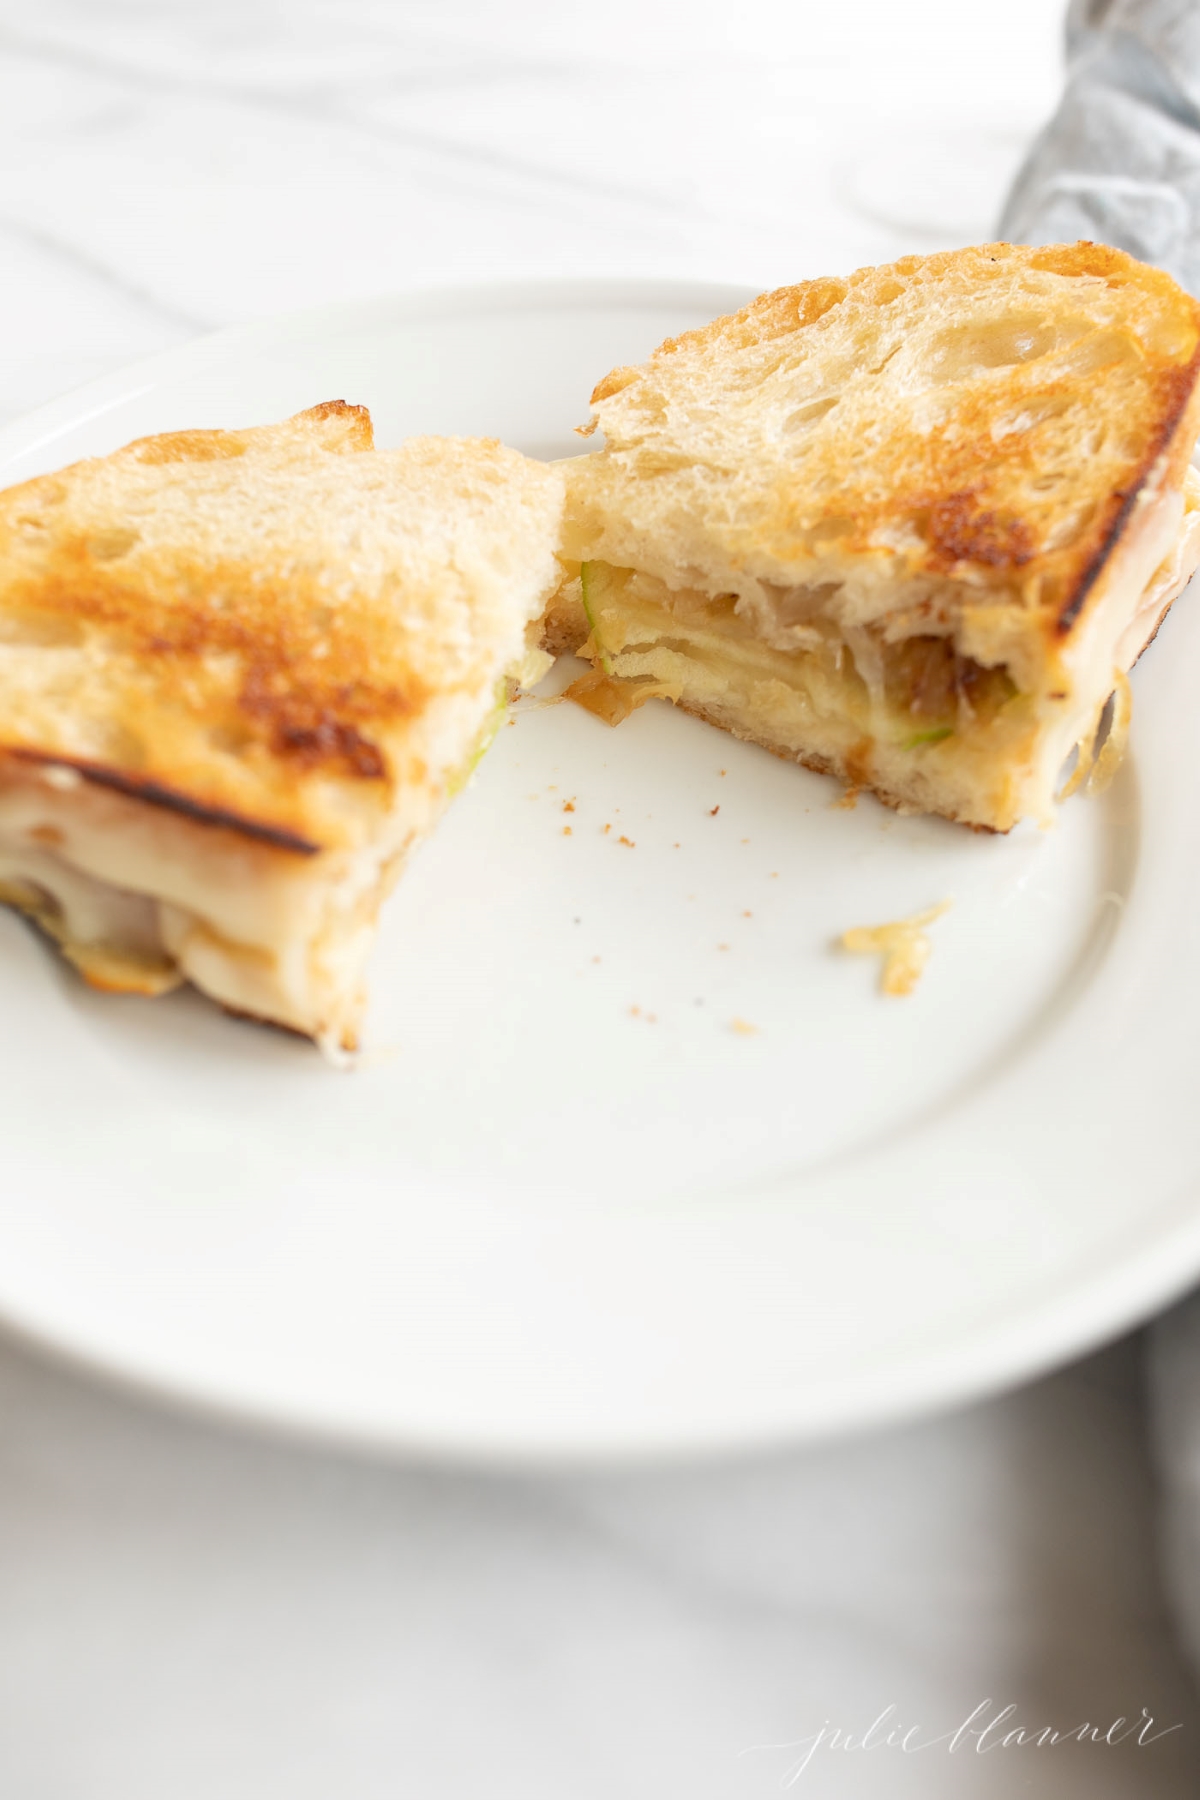 A gourmet grilled cheese on a white plate, cut into two.